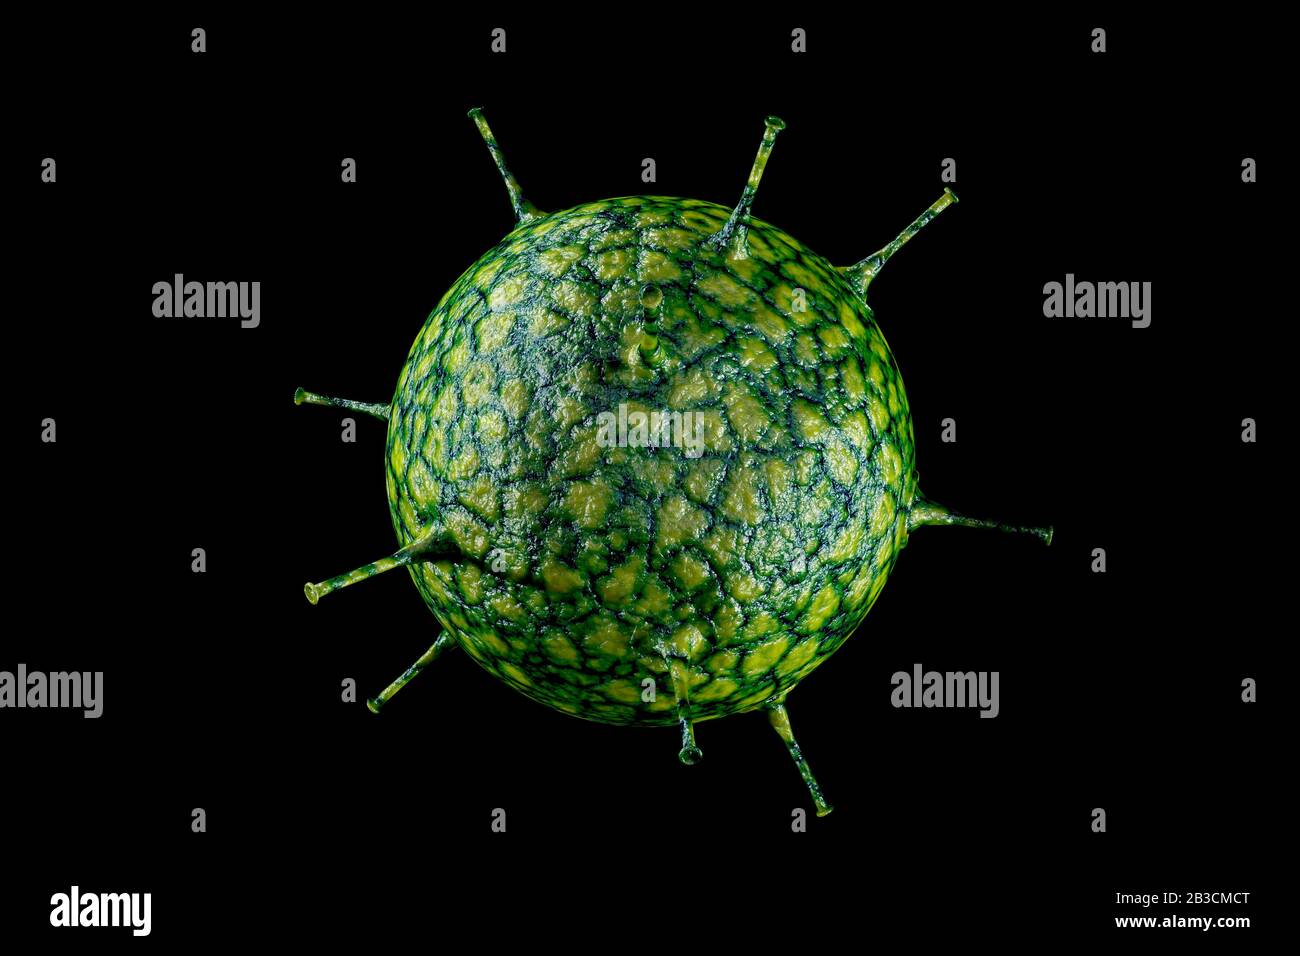 Infectious disease rhino virus common cold cell conceptual 3D illustration Stock Photo